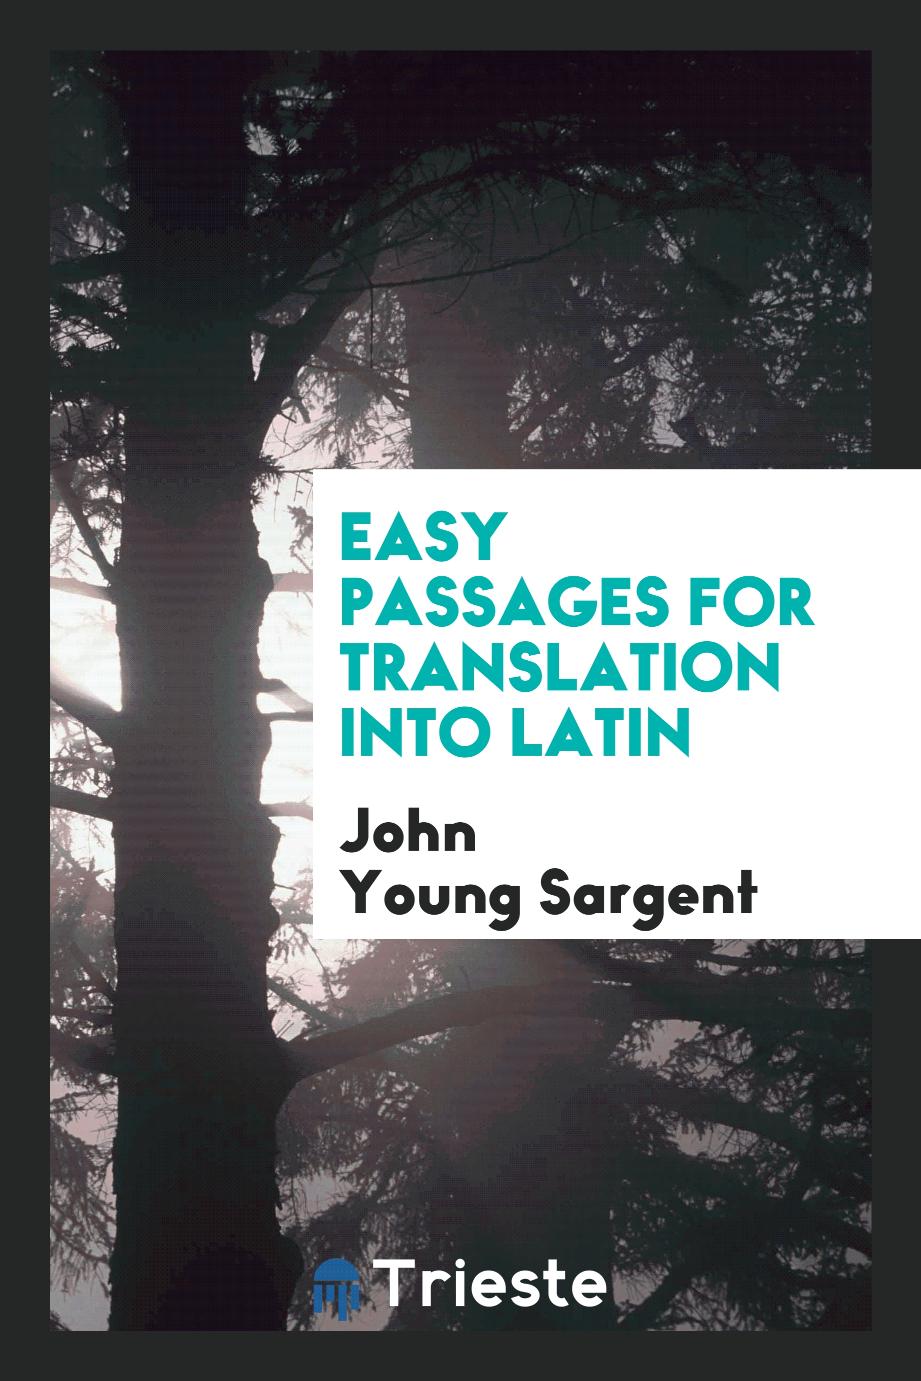 Easy passages for translation into Latin